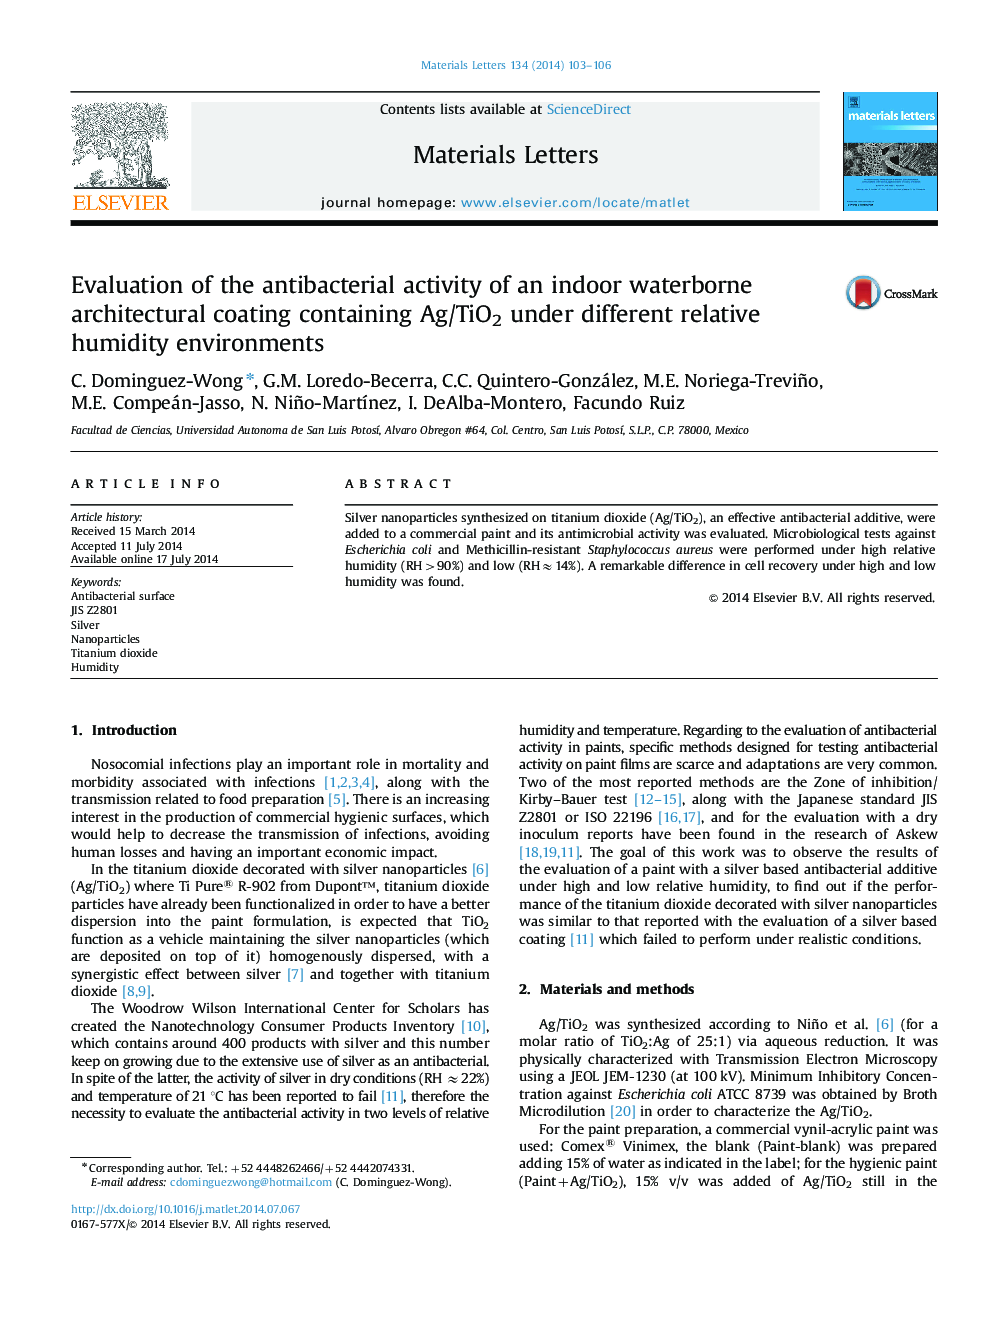 Evaluation of the antibacterial activity of an indoor waterborne architectural coating containing Ag/TiO2 under different relative humidity environments